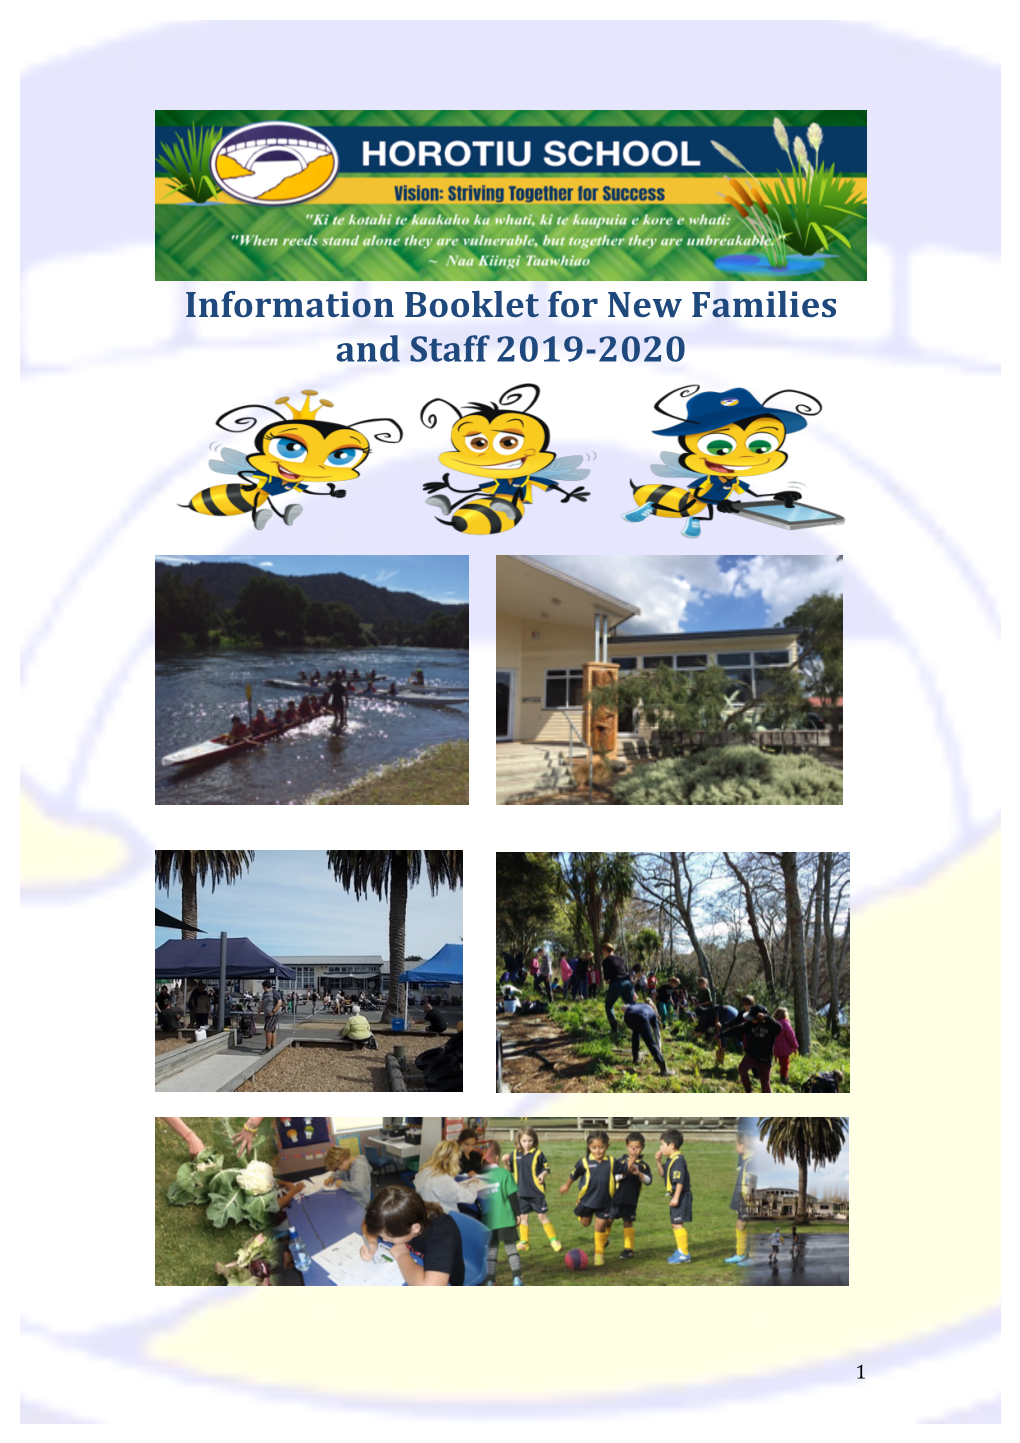 Information Booklet for New Families and Staff 2019-2020